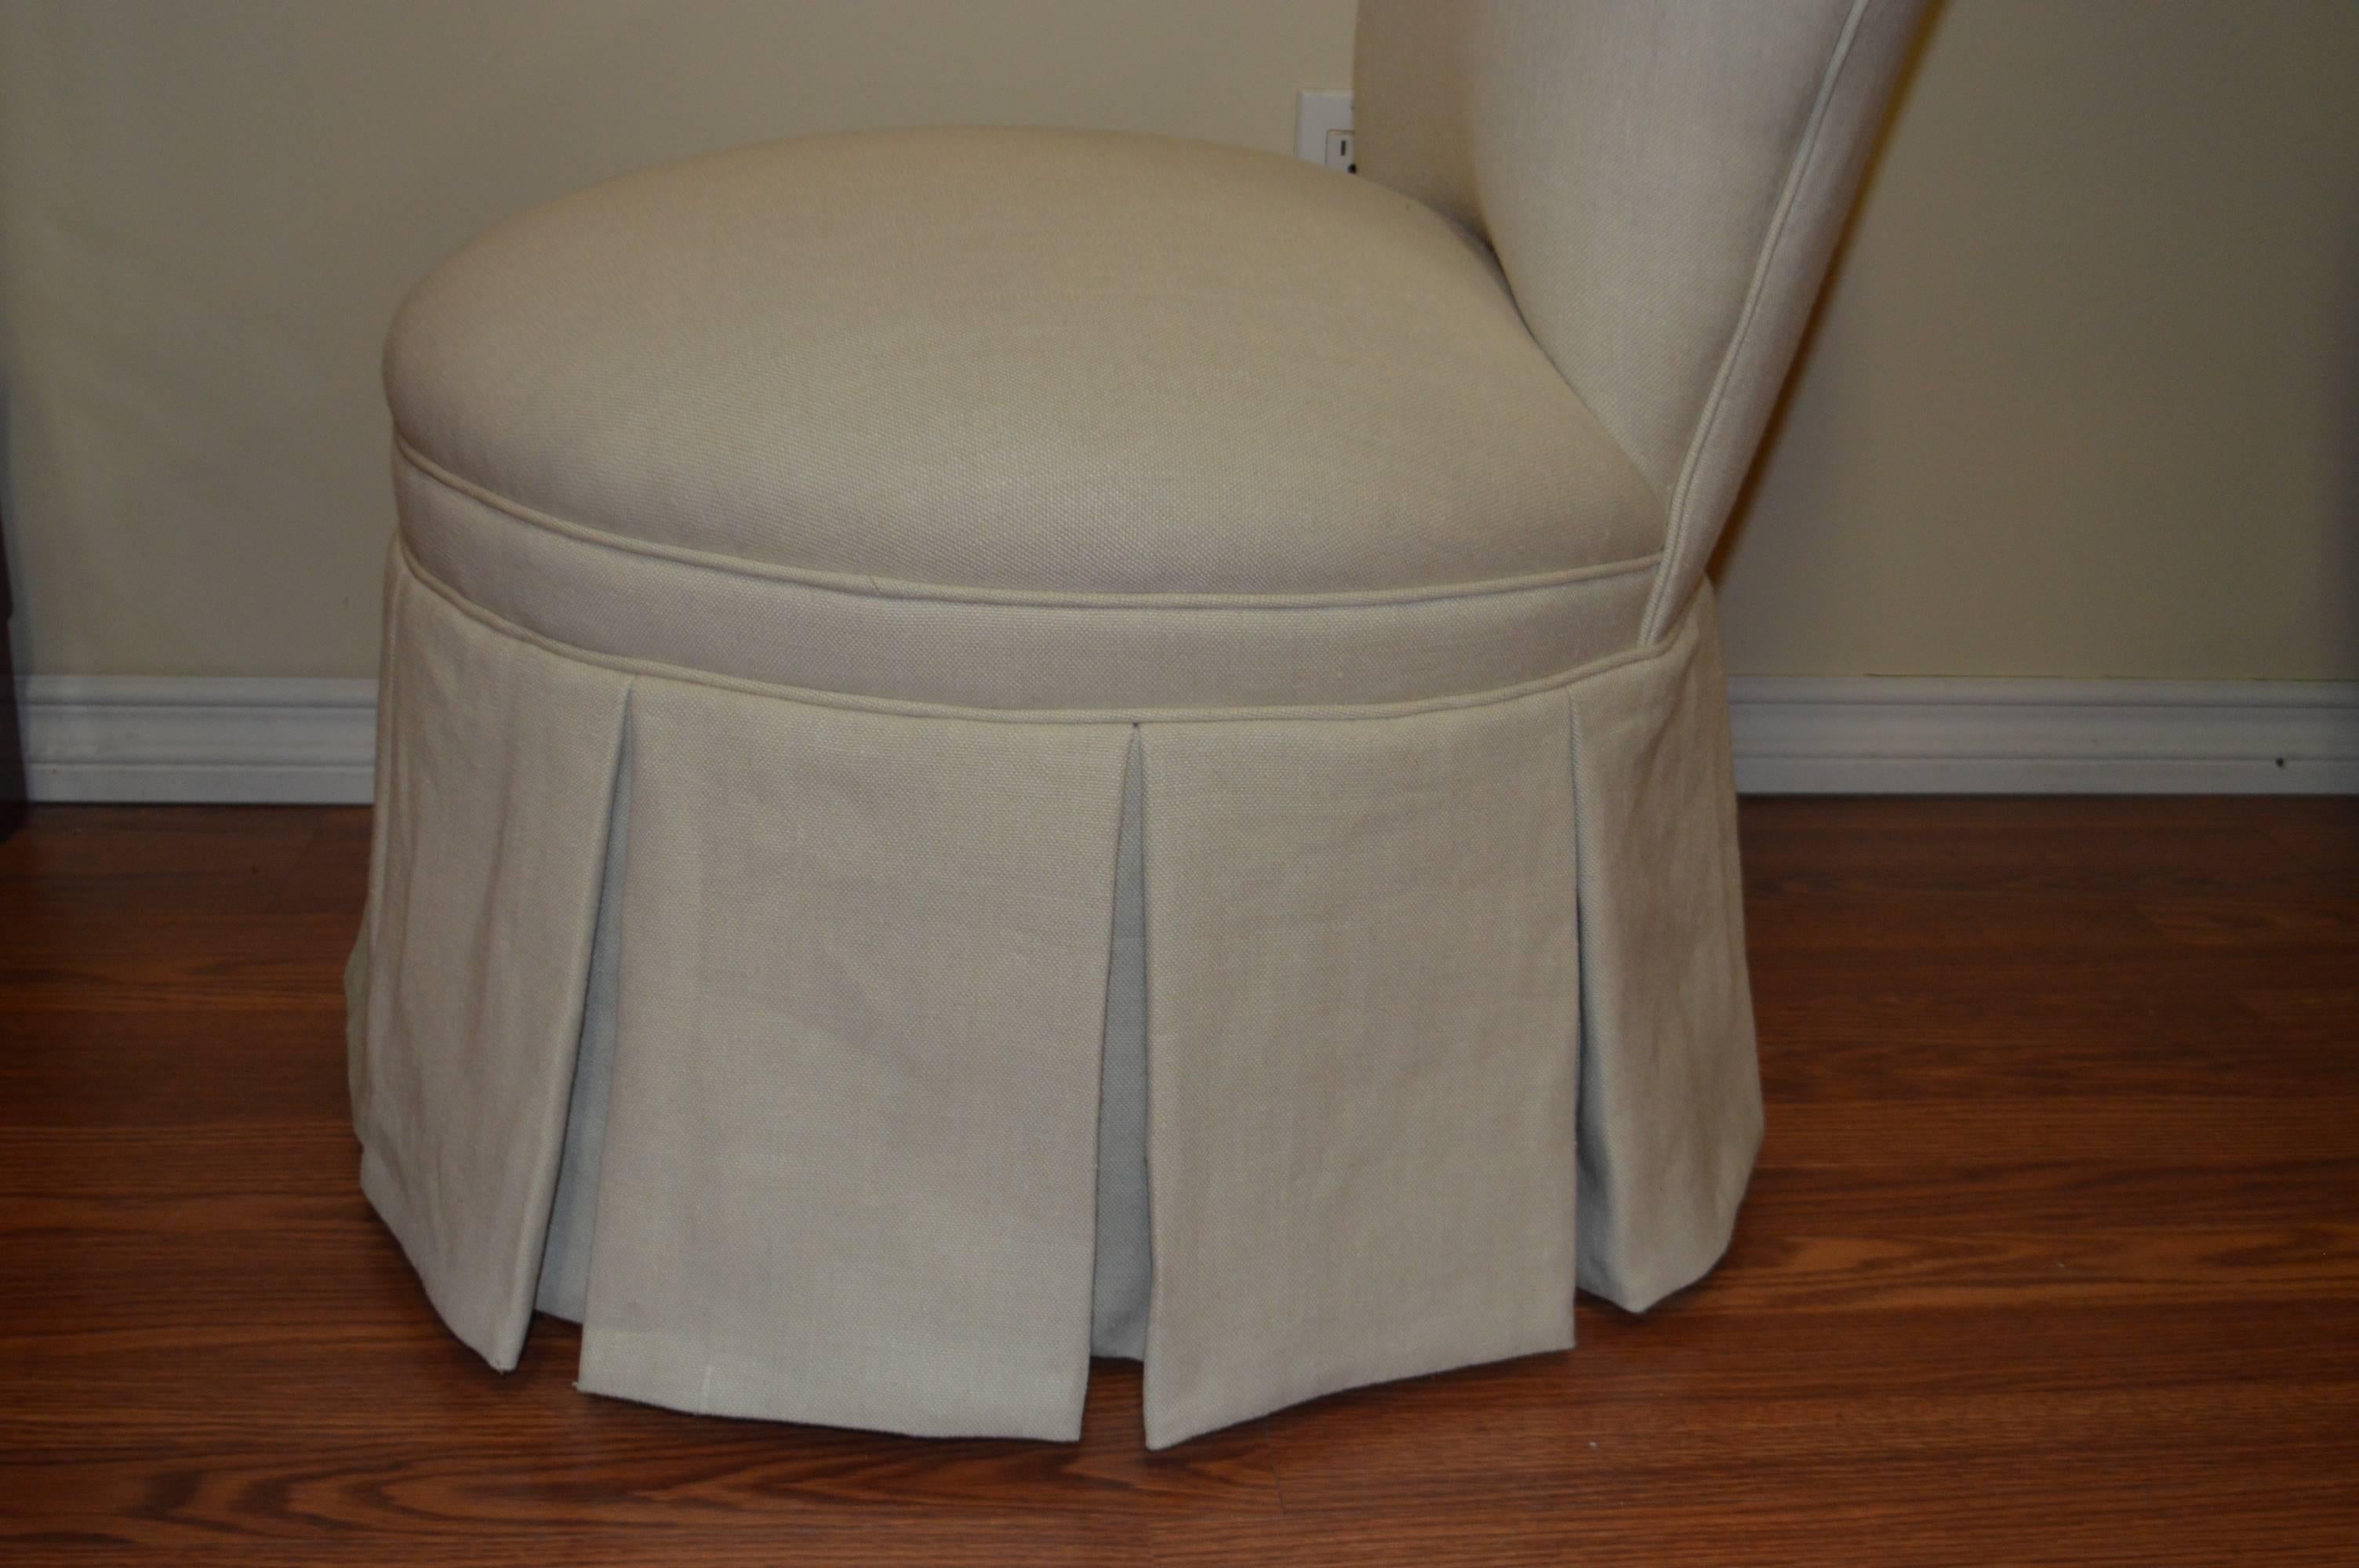 Lovely and comfy vintage slipper chair newly upholstered in a beige linen fabric.